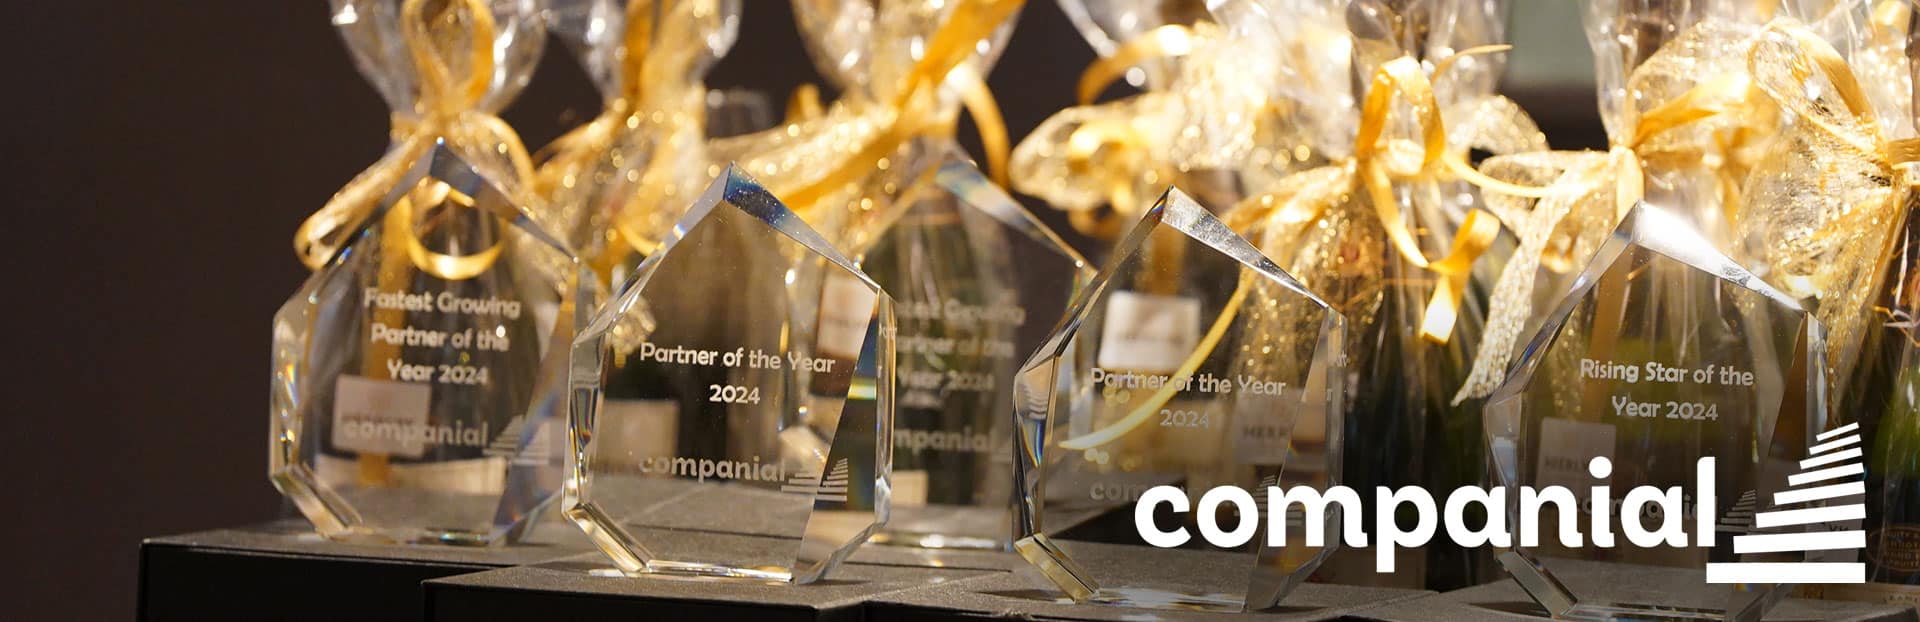 GMI group | Companial Partner of the Year 2024